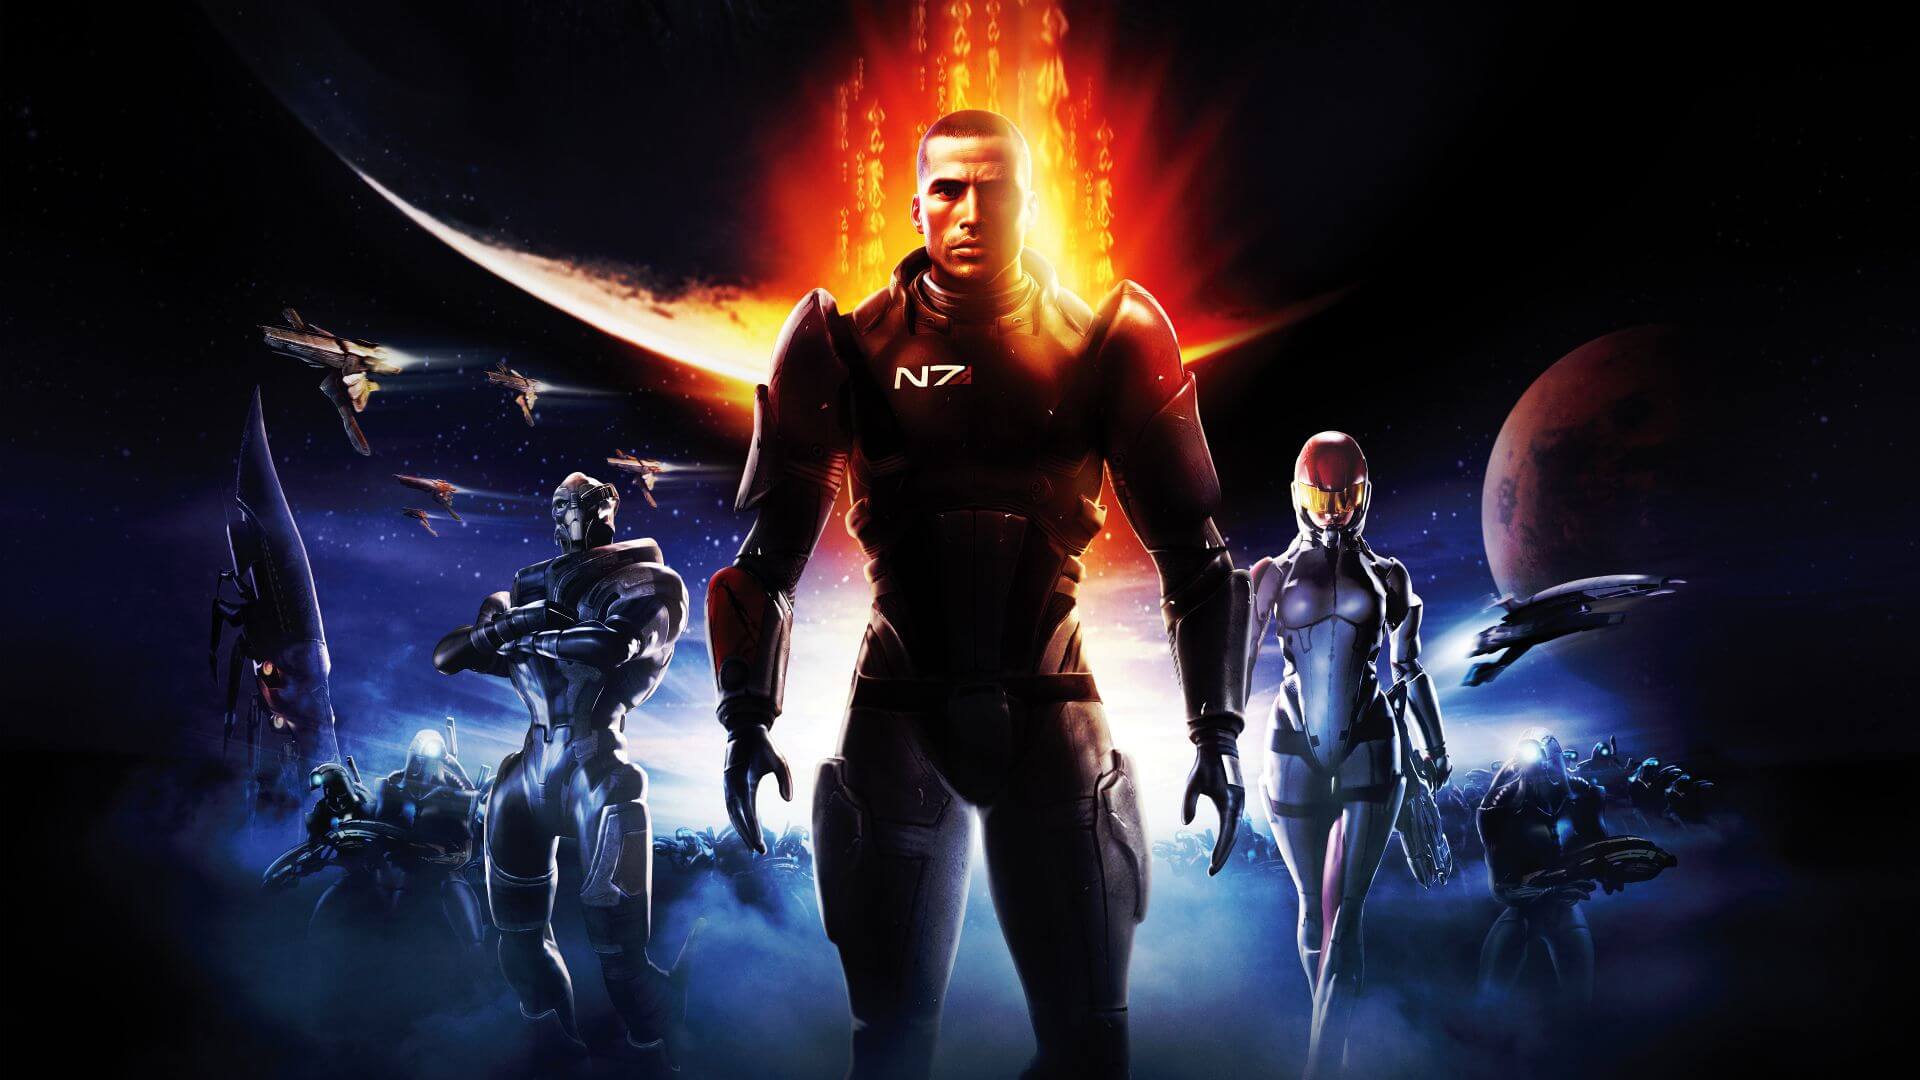 mass effect legendary edition release time pc